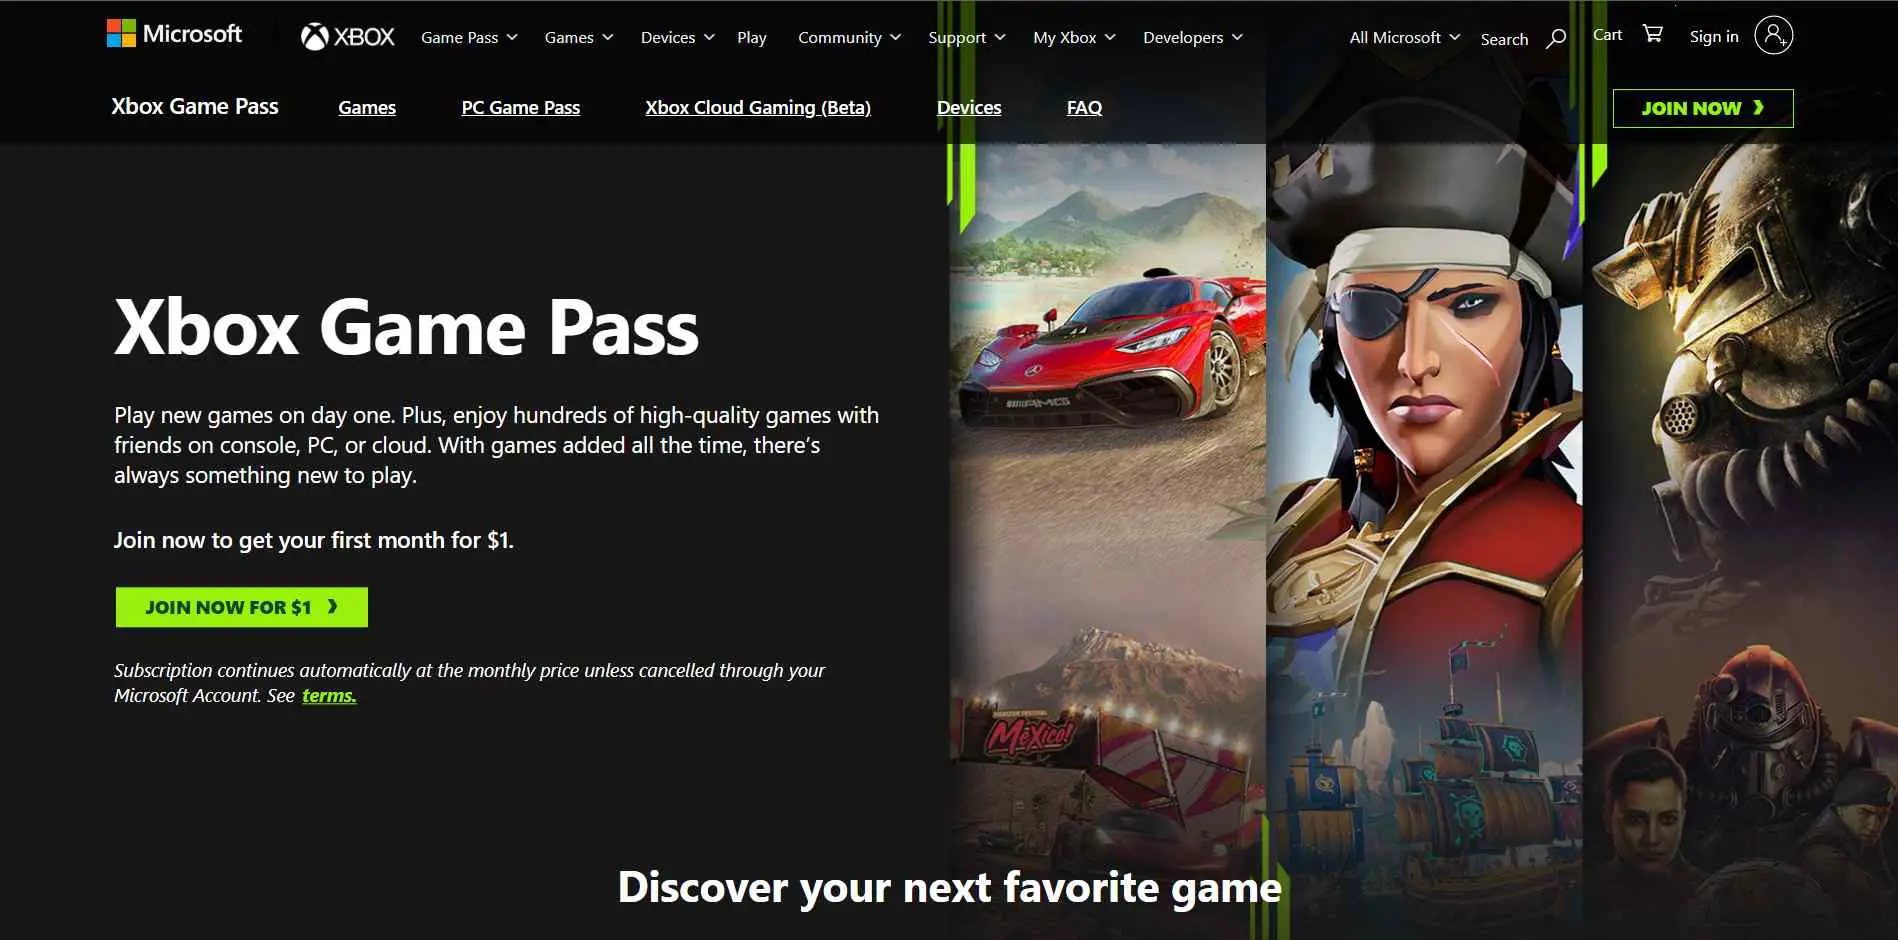 Xbox Game Pass Options for Video Game Rental